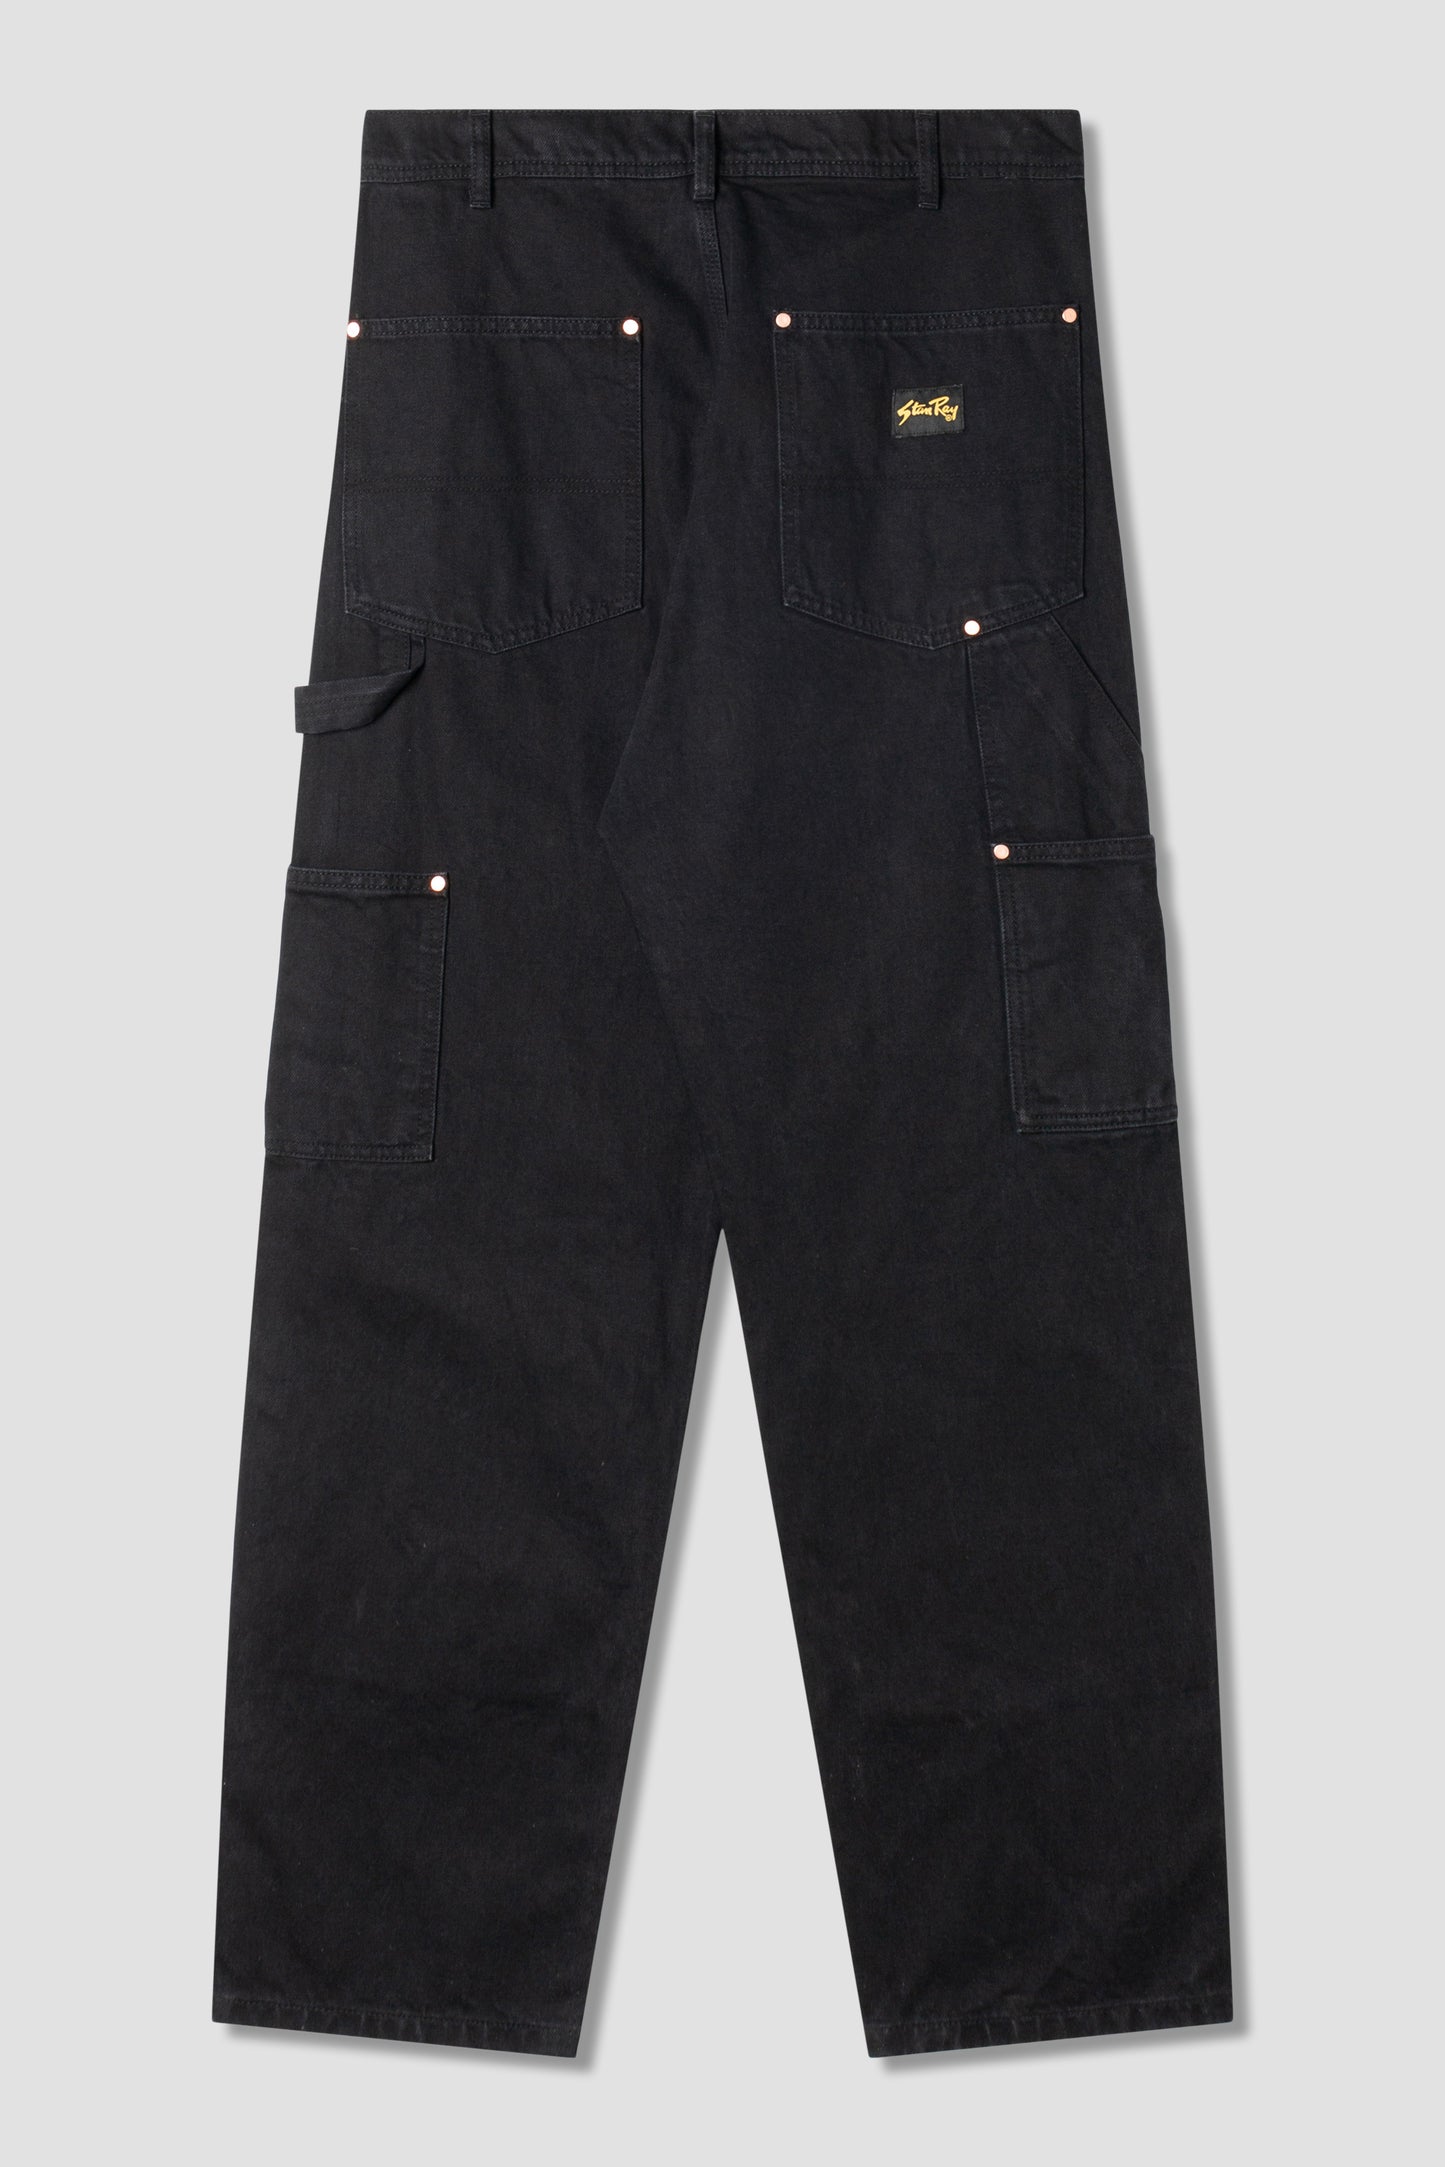 Double Knee Pant (Black Duck) – Stan Ray